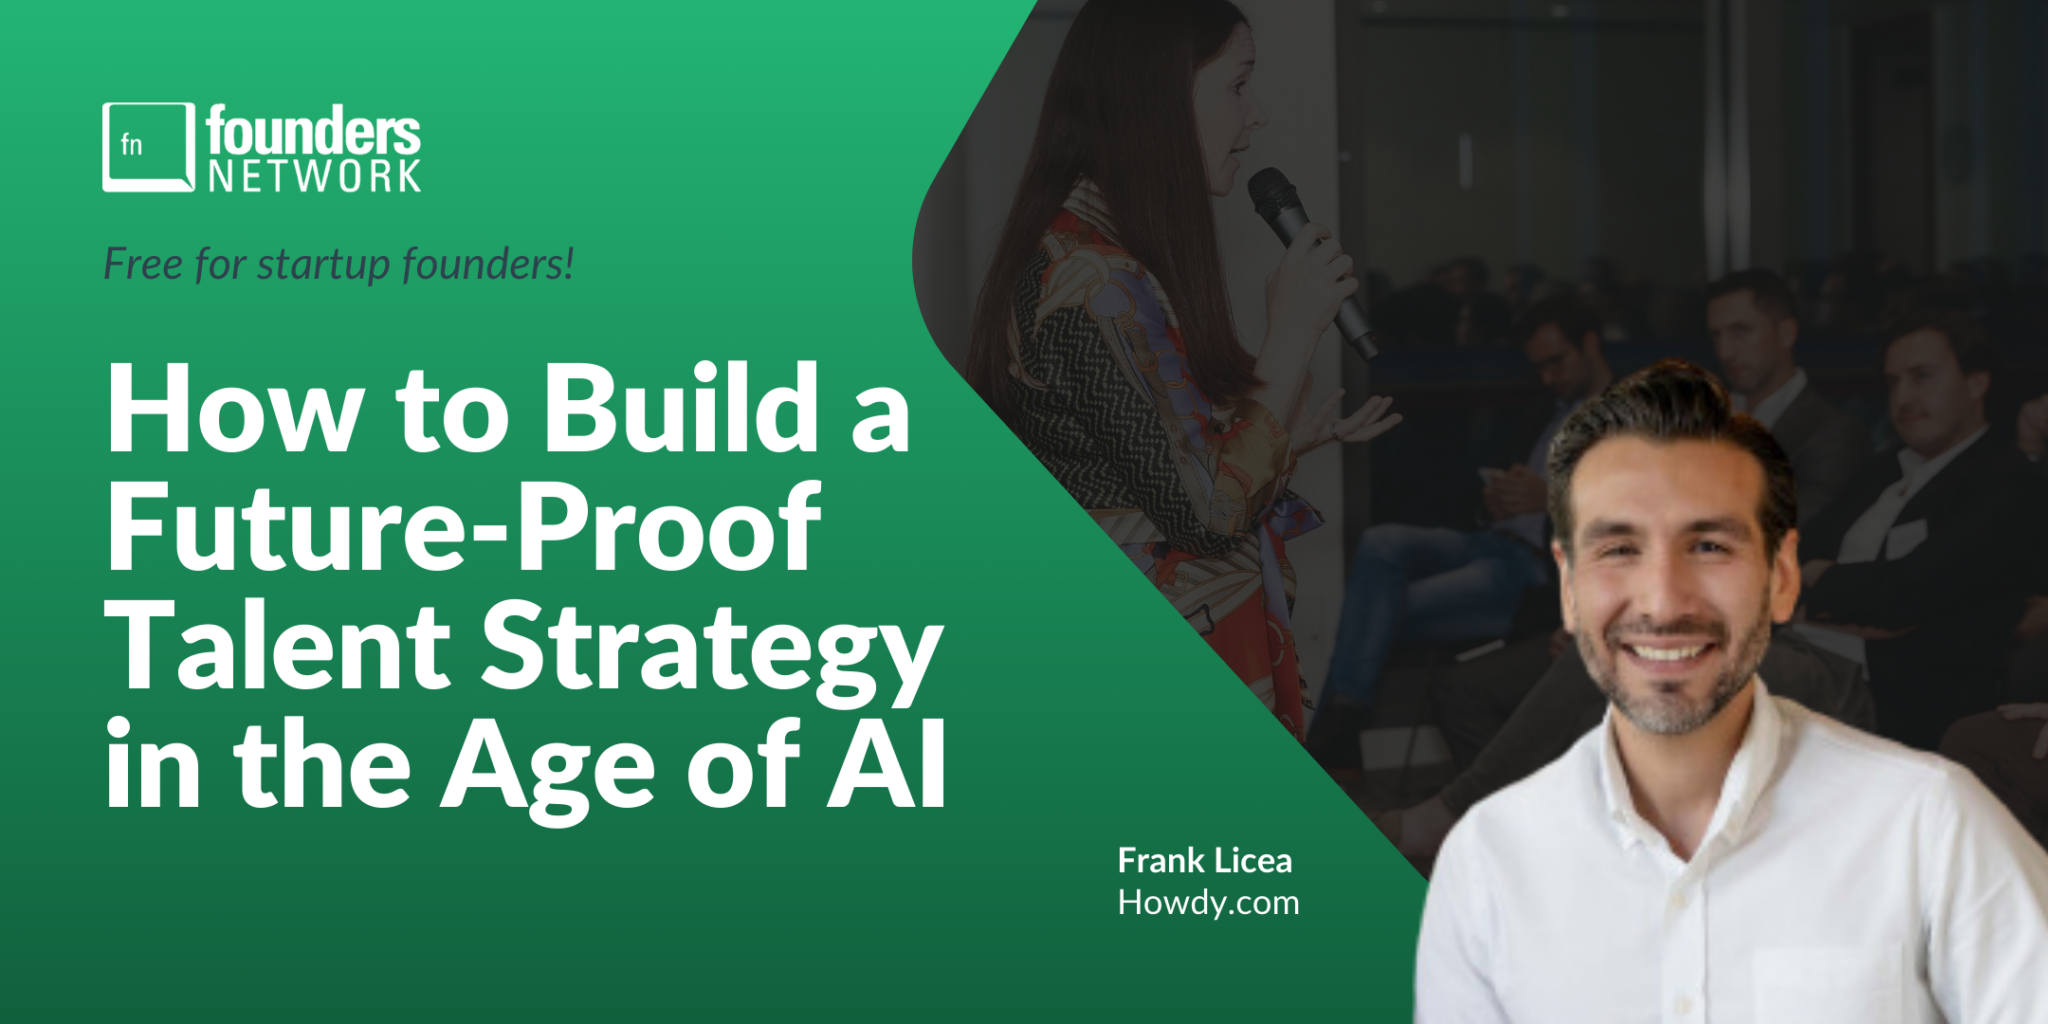 Featured image for “How to Build a Future-Proof Talent Strategy in the Age of AI”